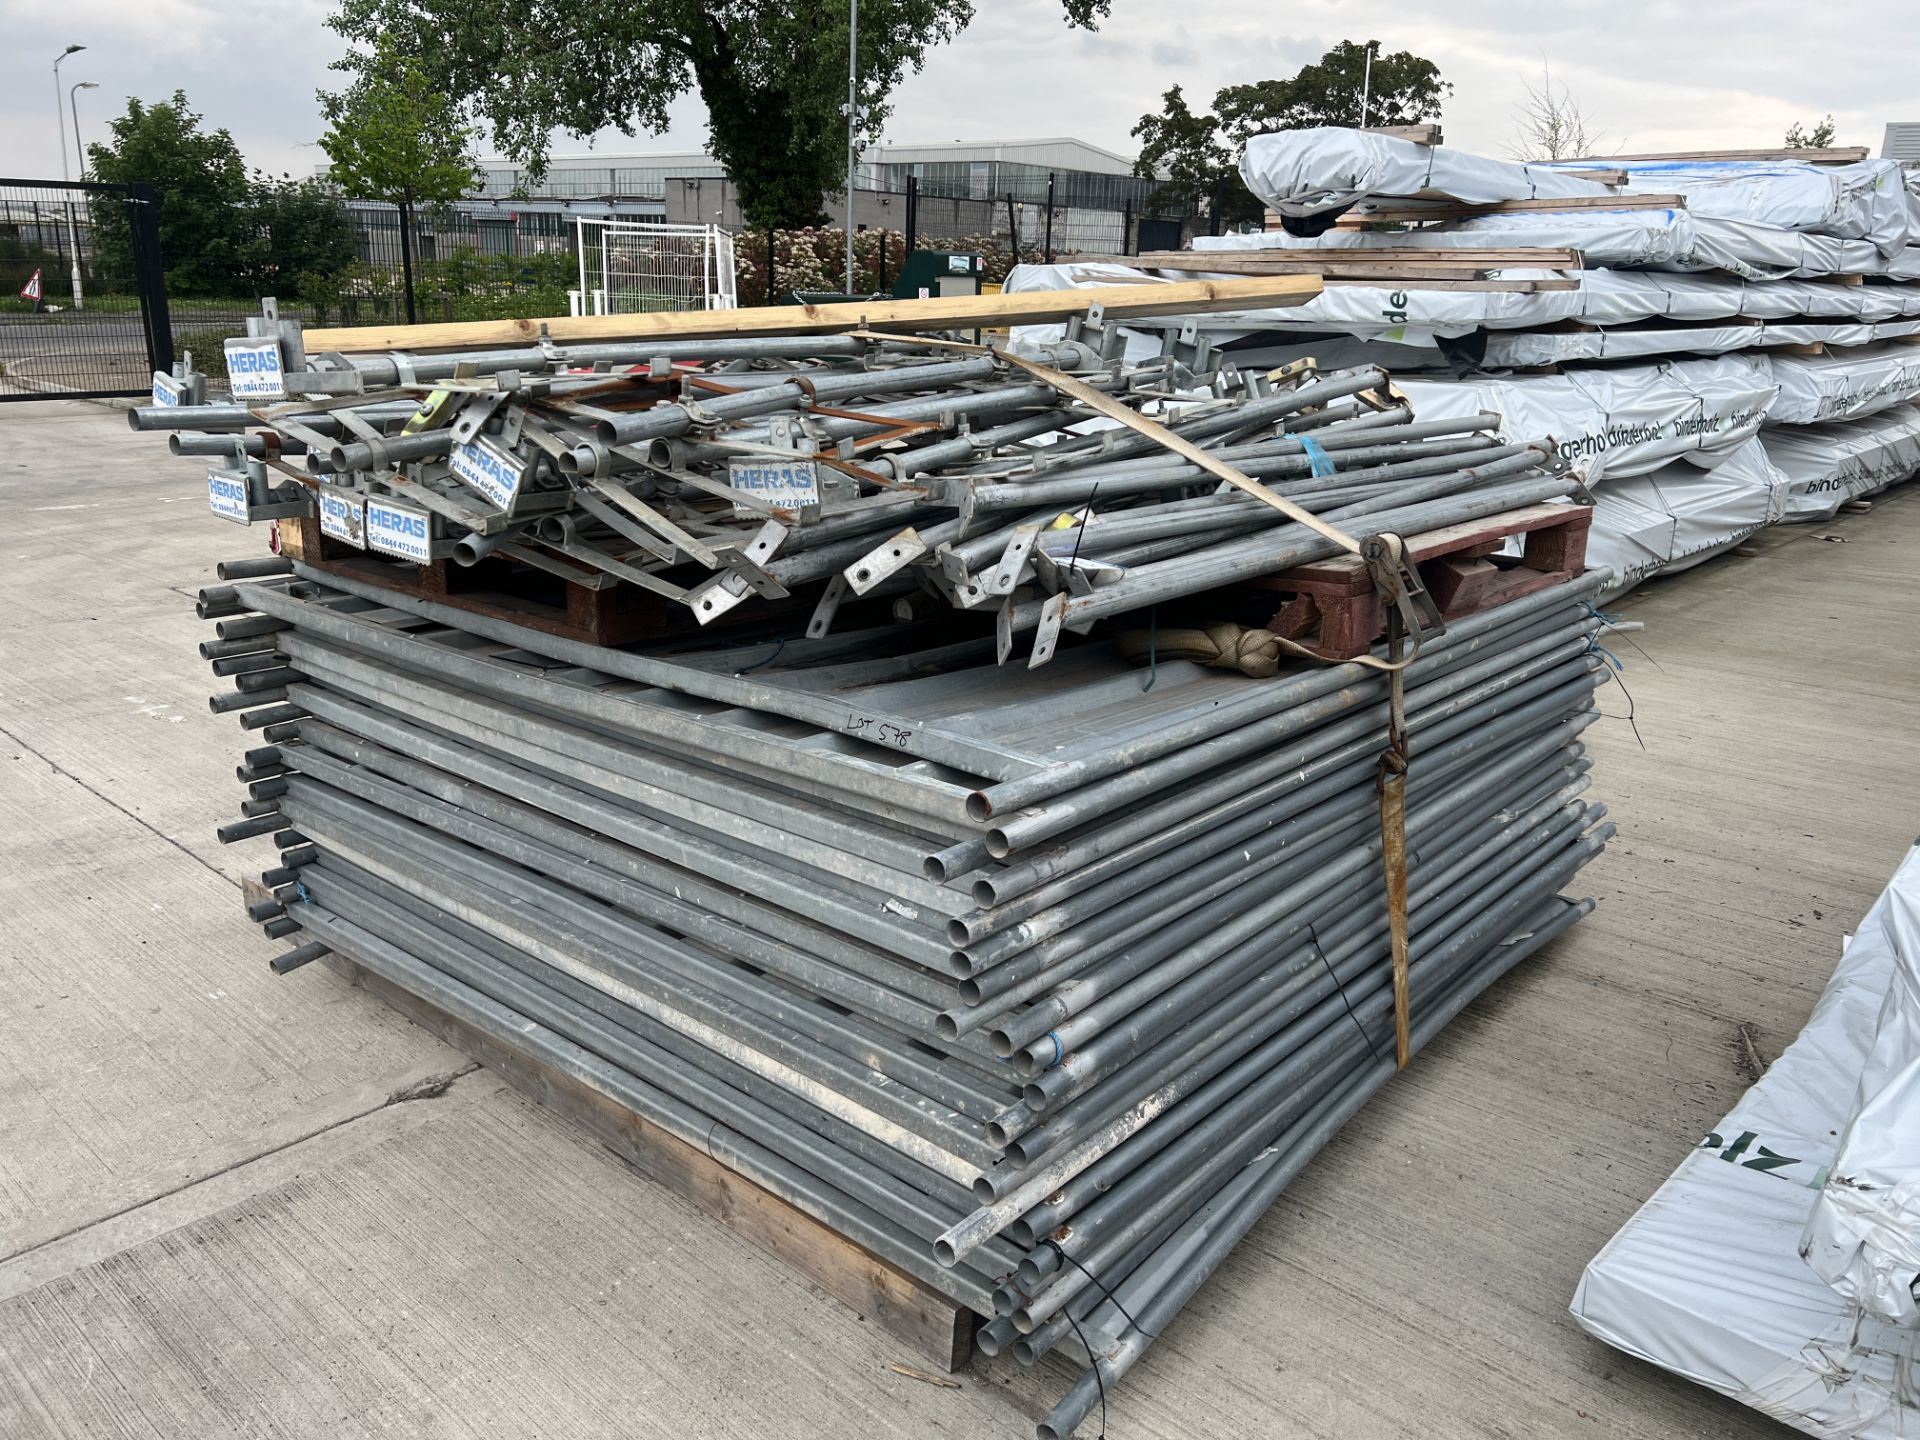 20 x (no.) Temporary Heras galvanised steel site hoarding fencing panals. Please note fence panels